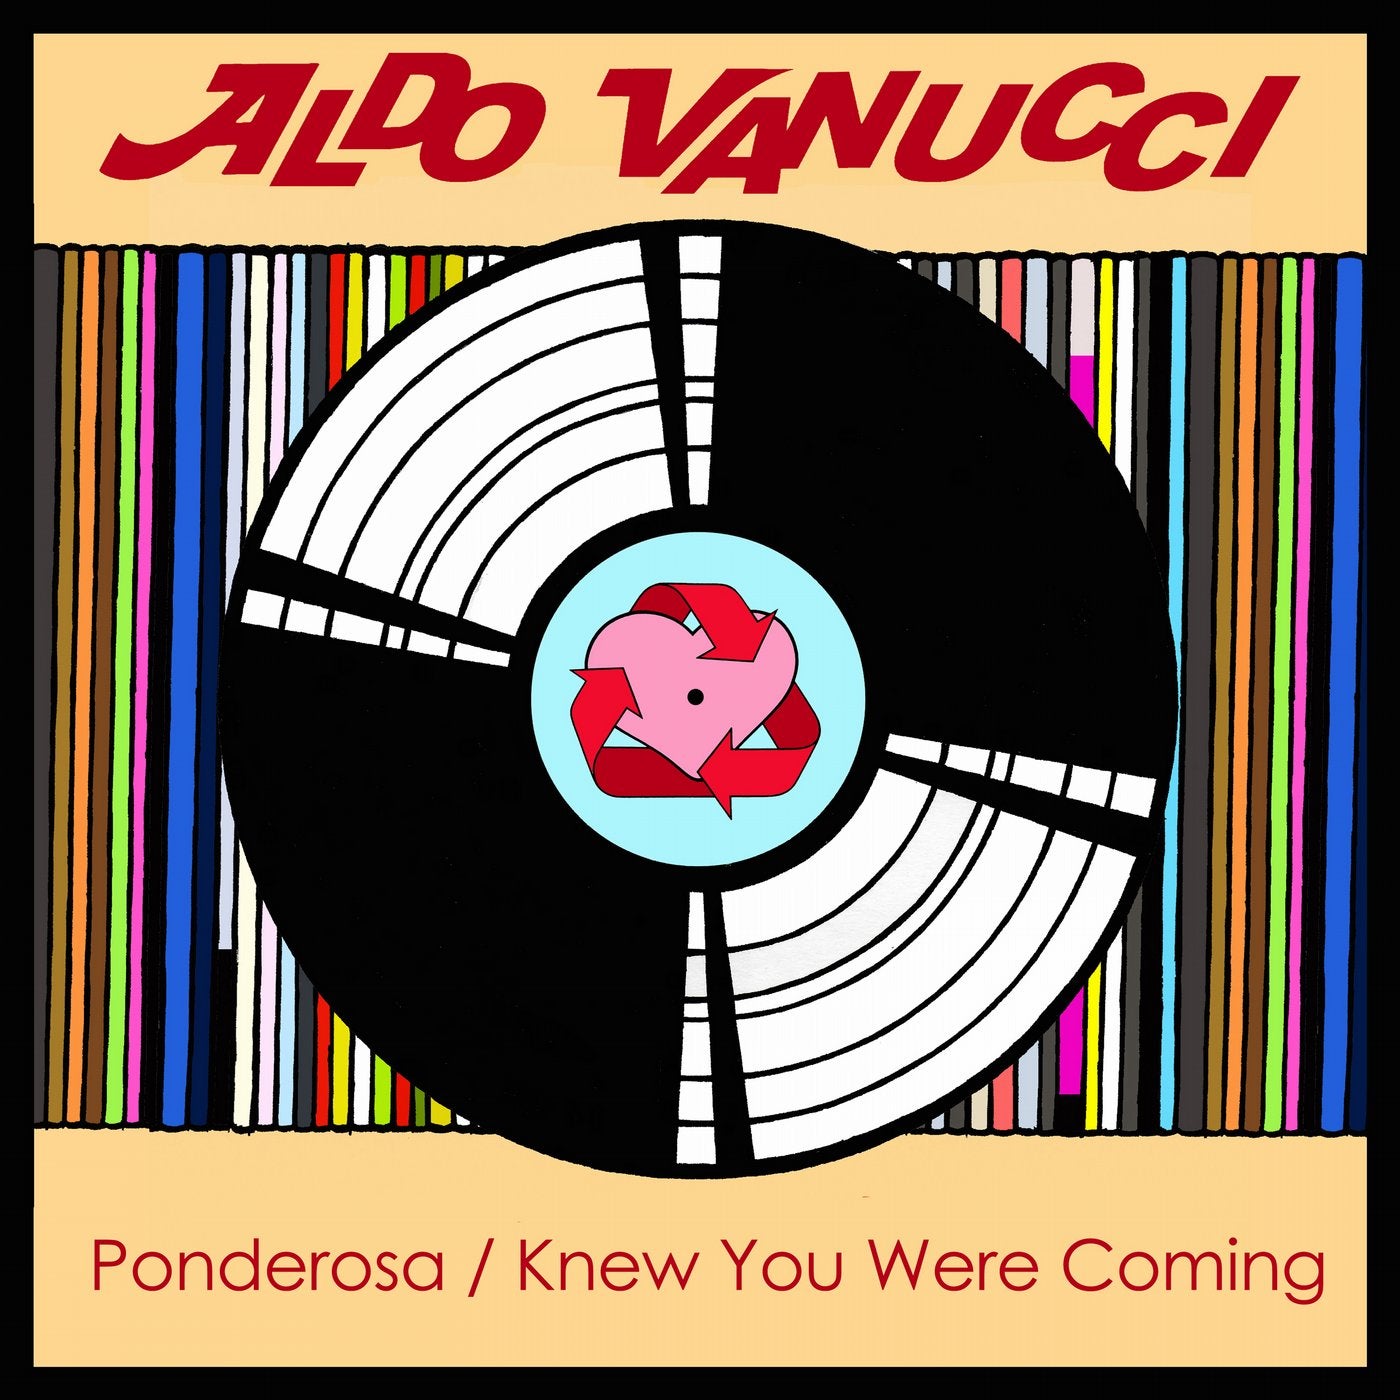 Ponderosa / Knew You Were Coming